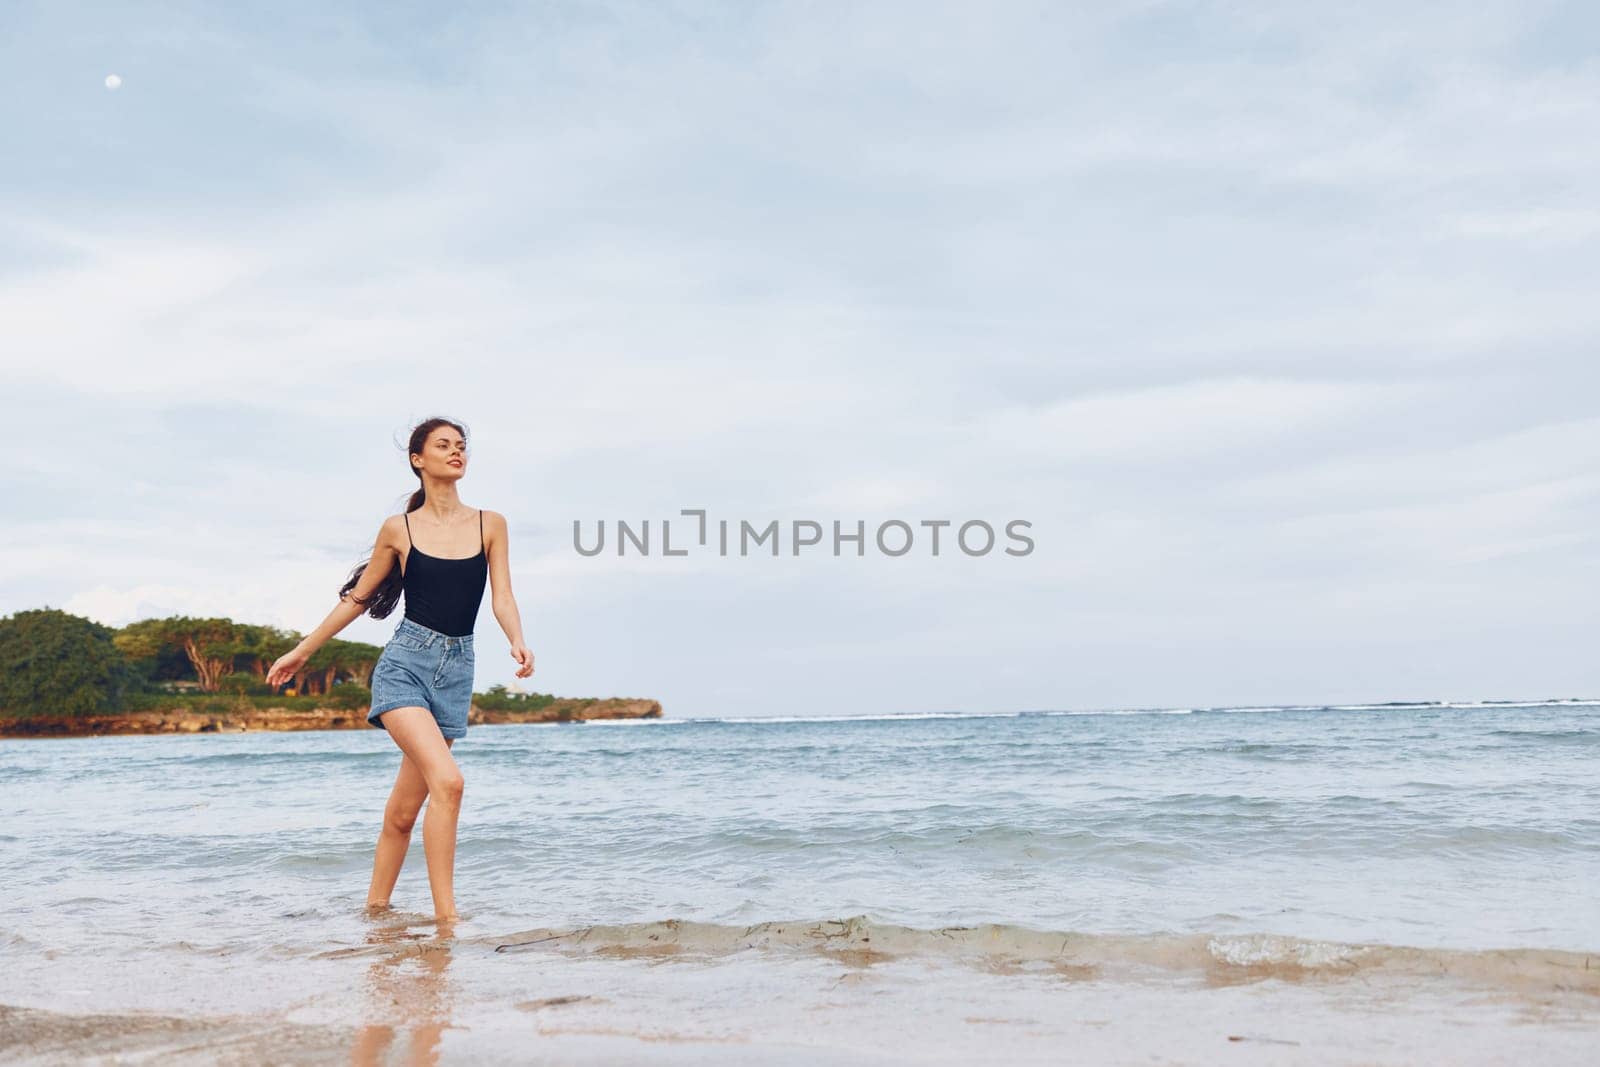 beach woman summer sunset sea young ocean smile running travel lifestyle by SHOTPRIME